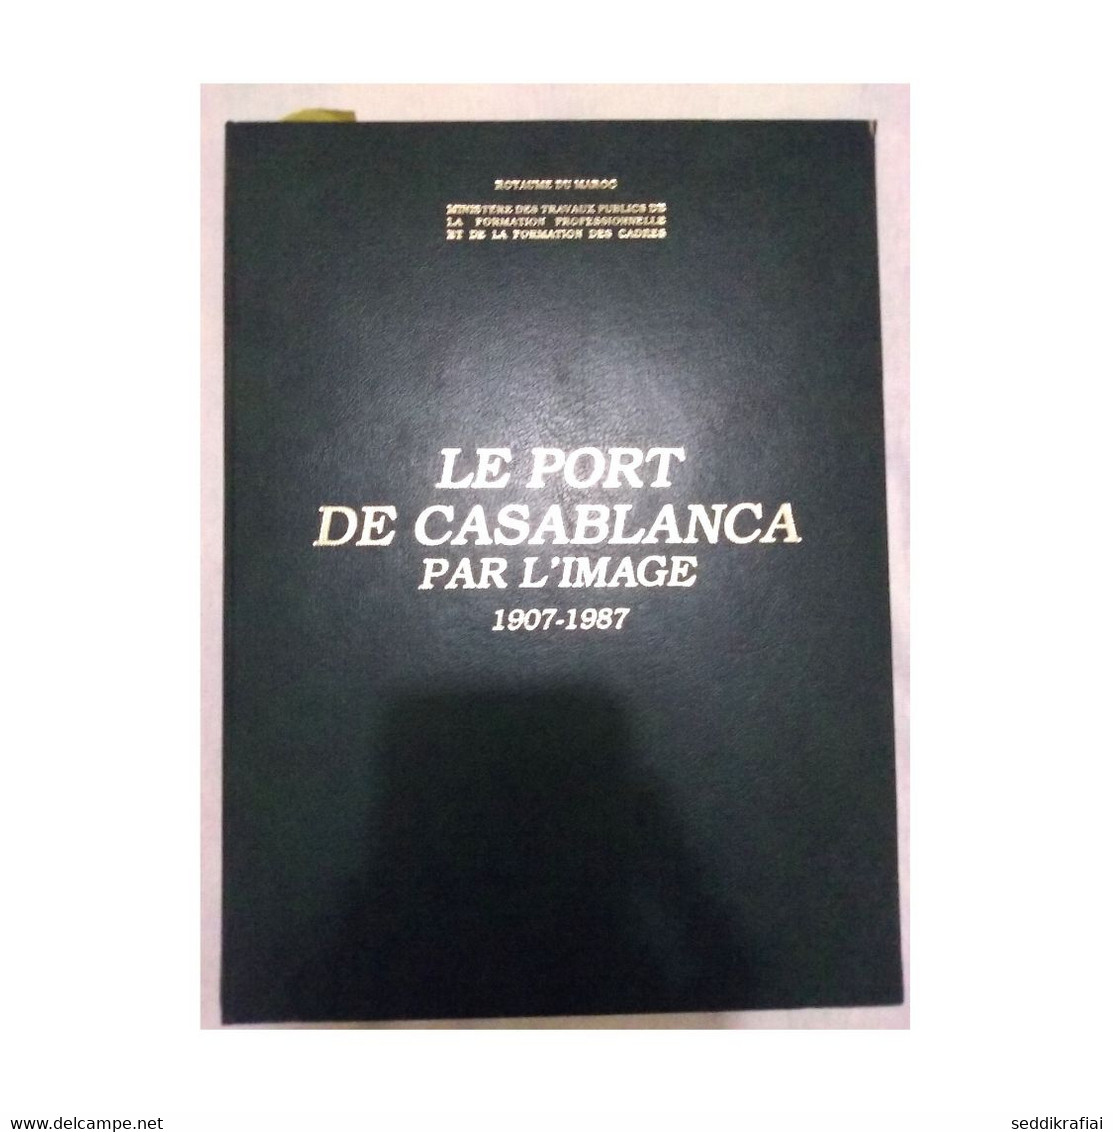 Vintage Morocco Book The Port Of Casablanca Binding Leather By The Image 1907-1987 Hassan 2 - Revistas & Catálogos